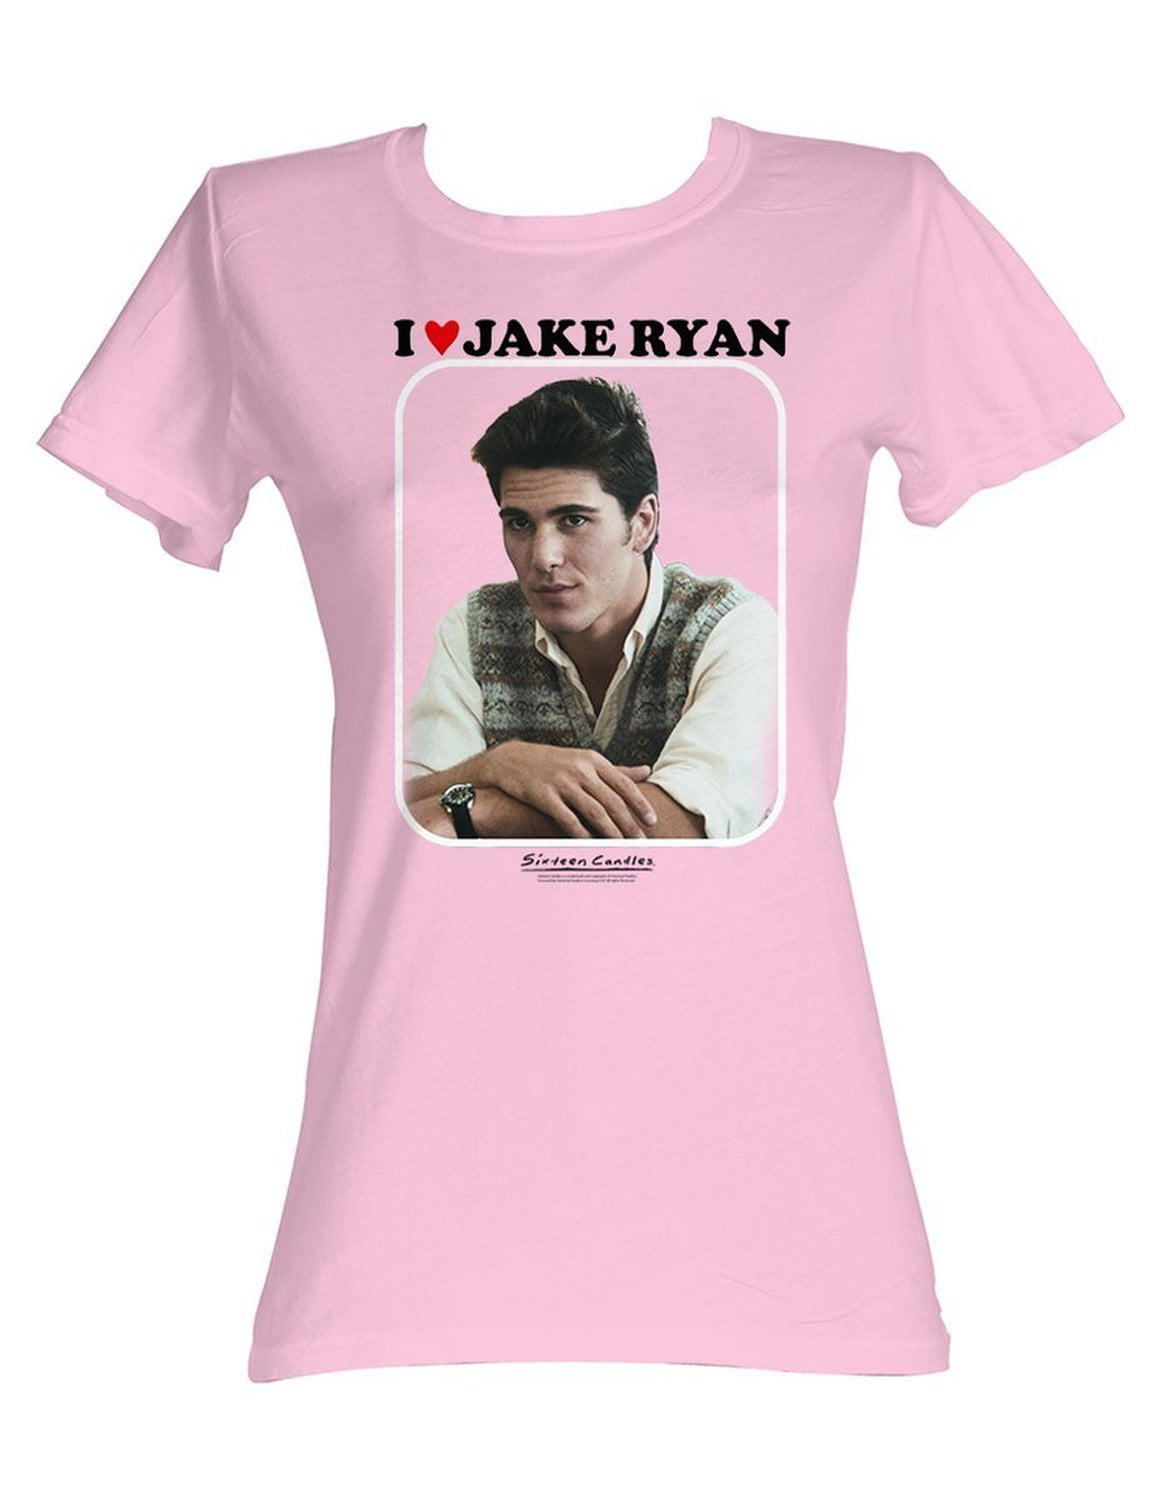 Pictures of jake ryan